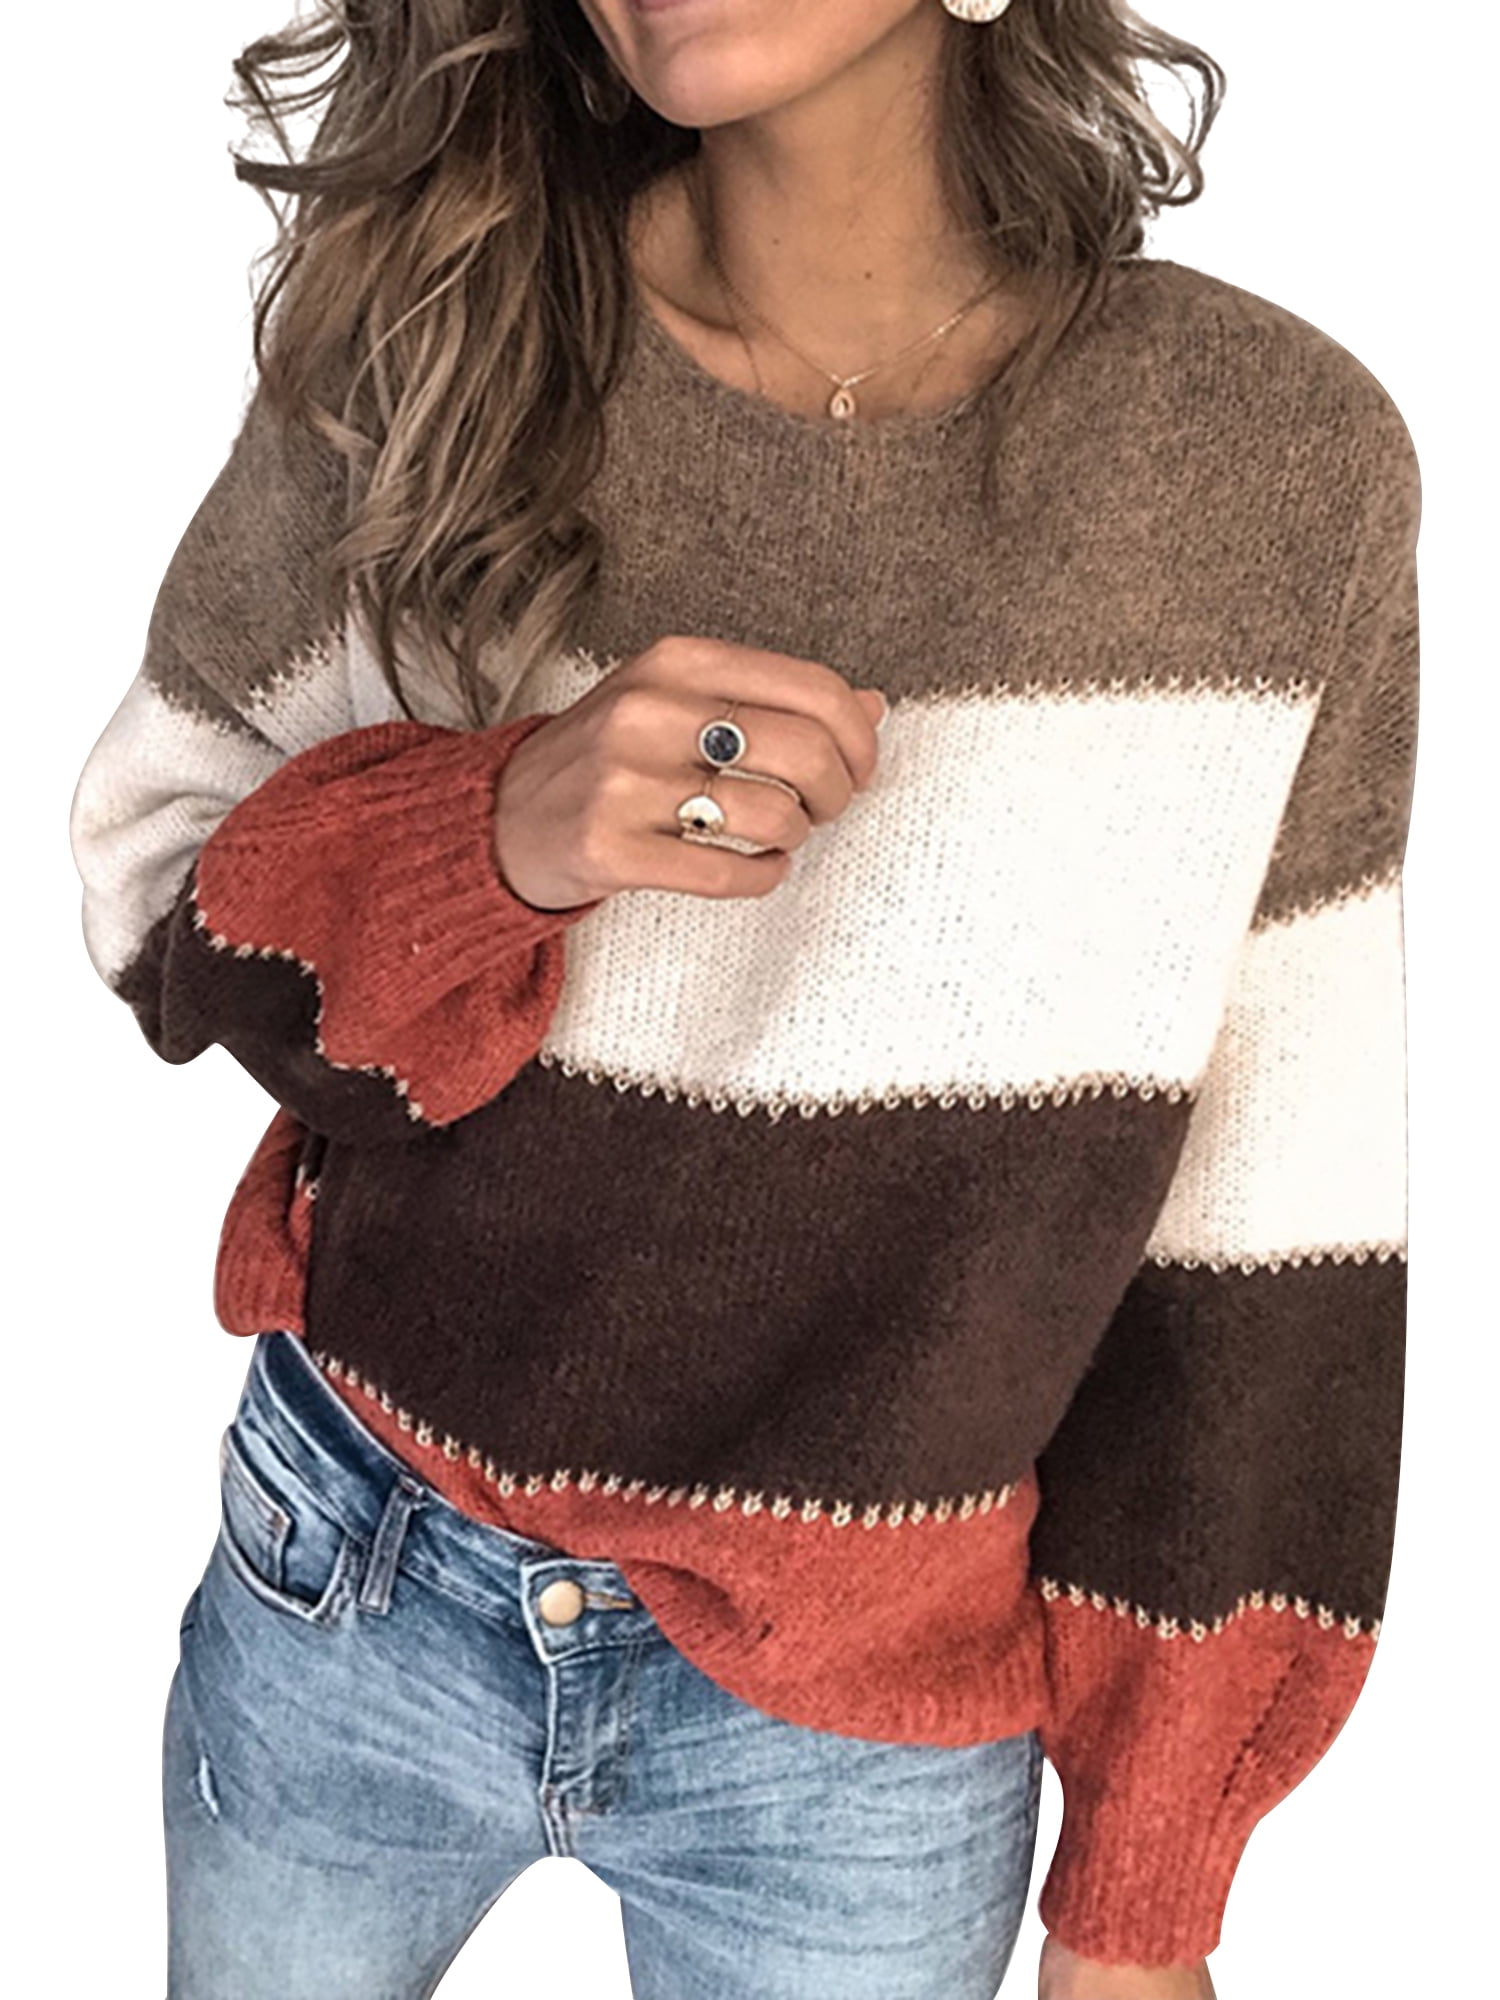 Women Winter Knitted Sweater Long Sleeve Colorblock Jumper Loose Pullover Tops 